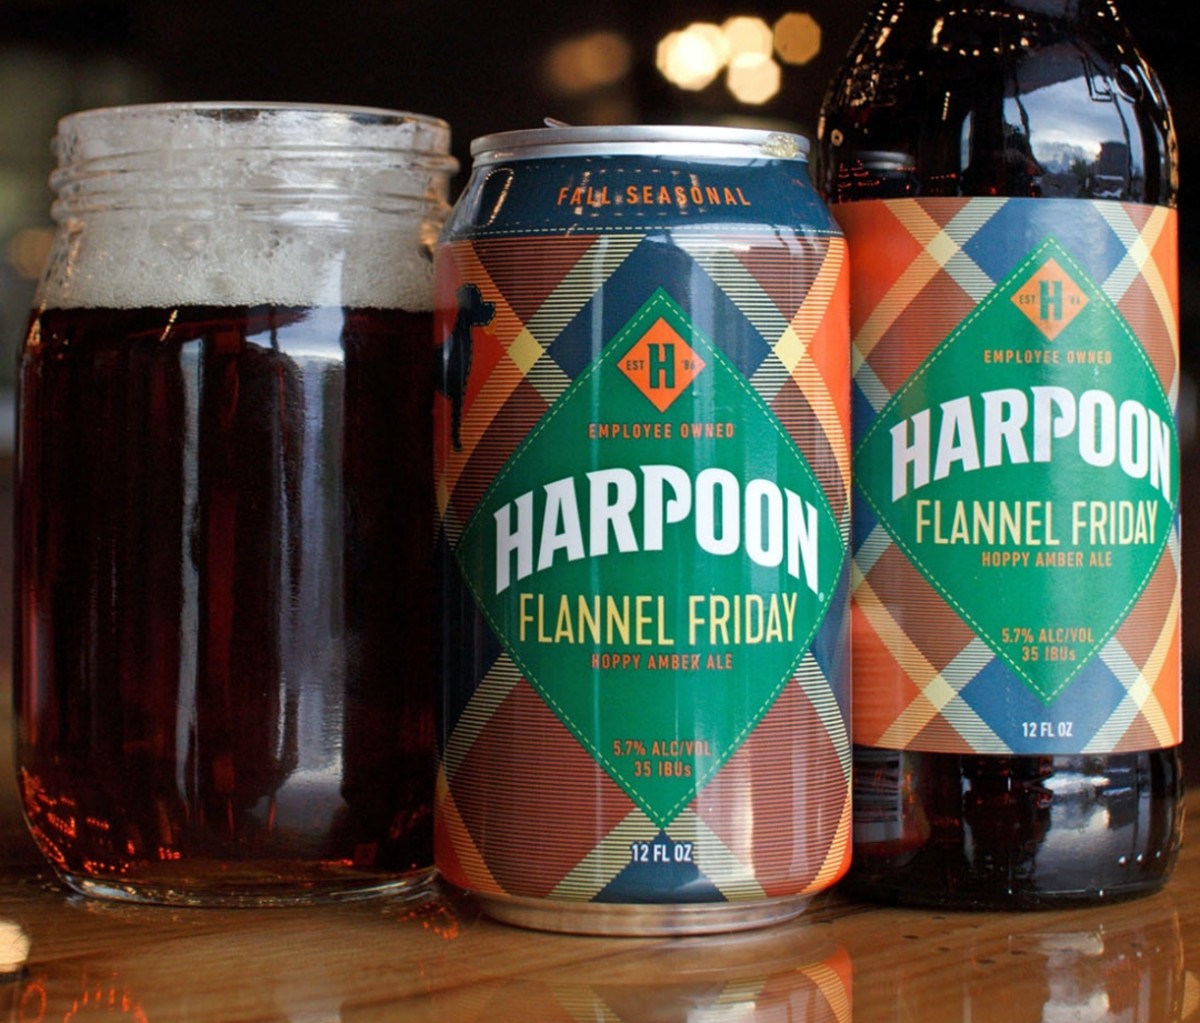 Harpoon Flannel Friday fall beer in a mug, a can, and a bottle